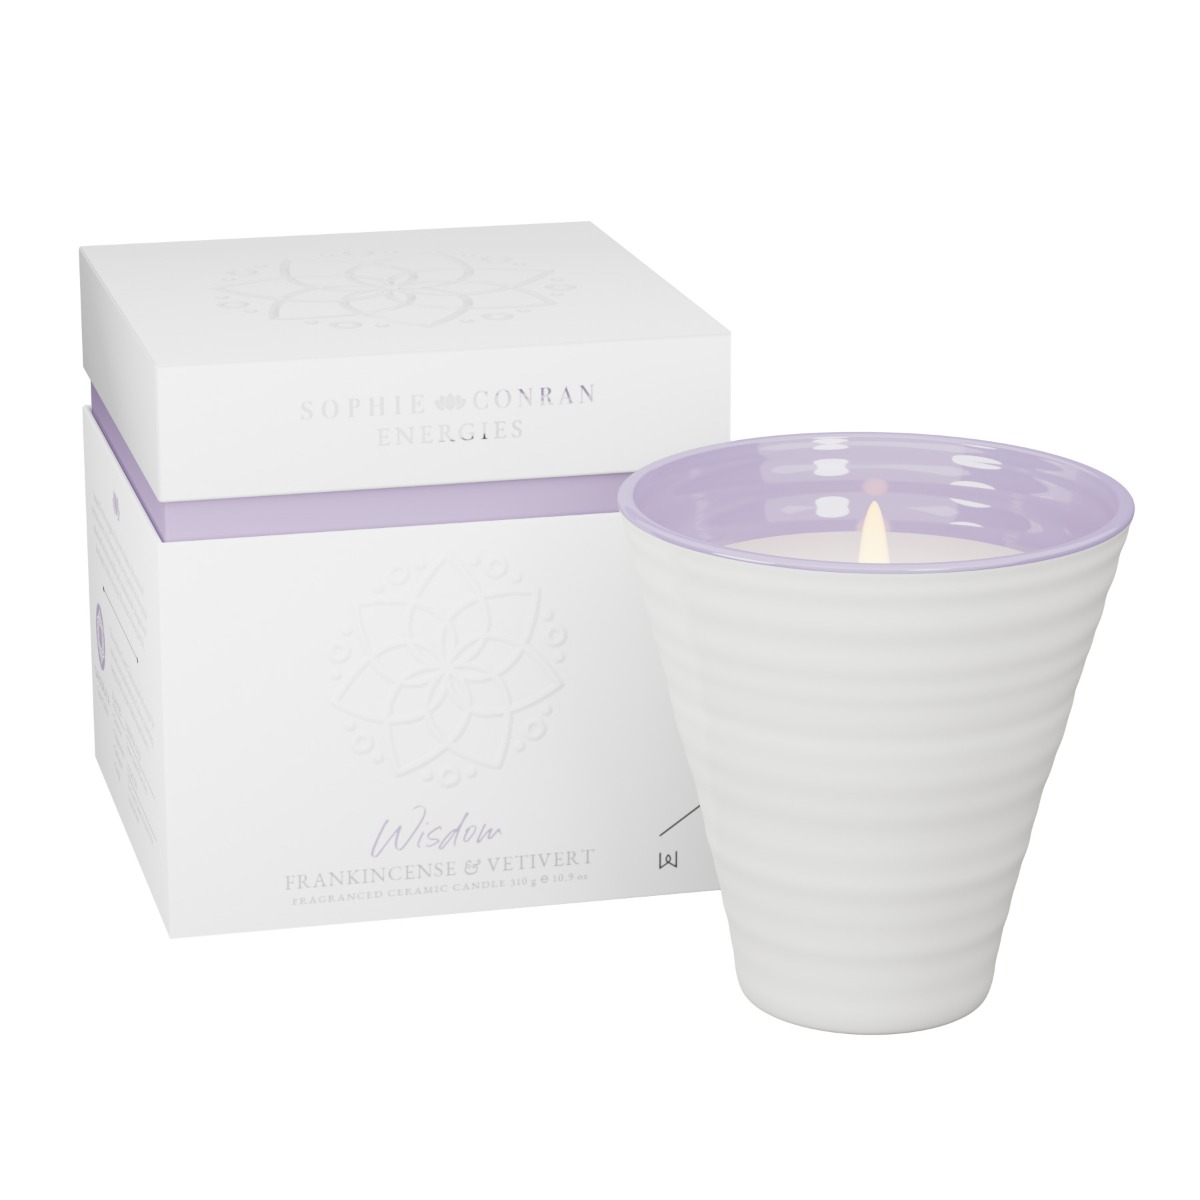 Sophie Conran Energies Wisdom Candle image number null